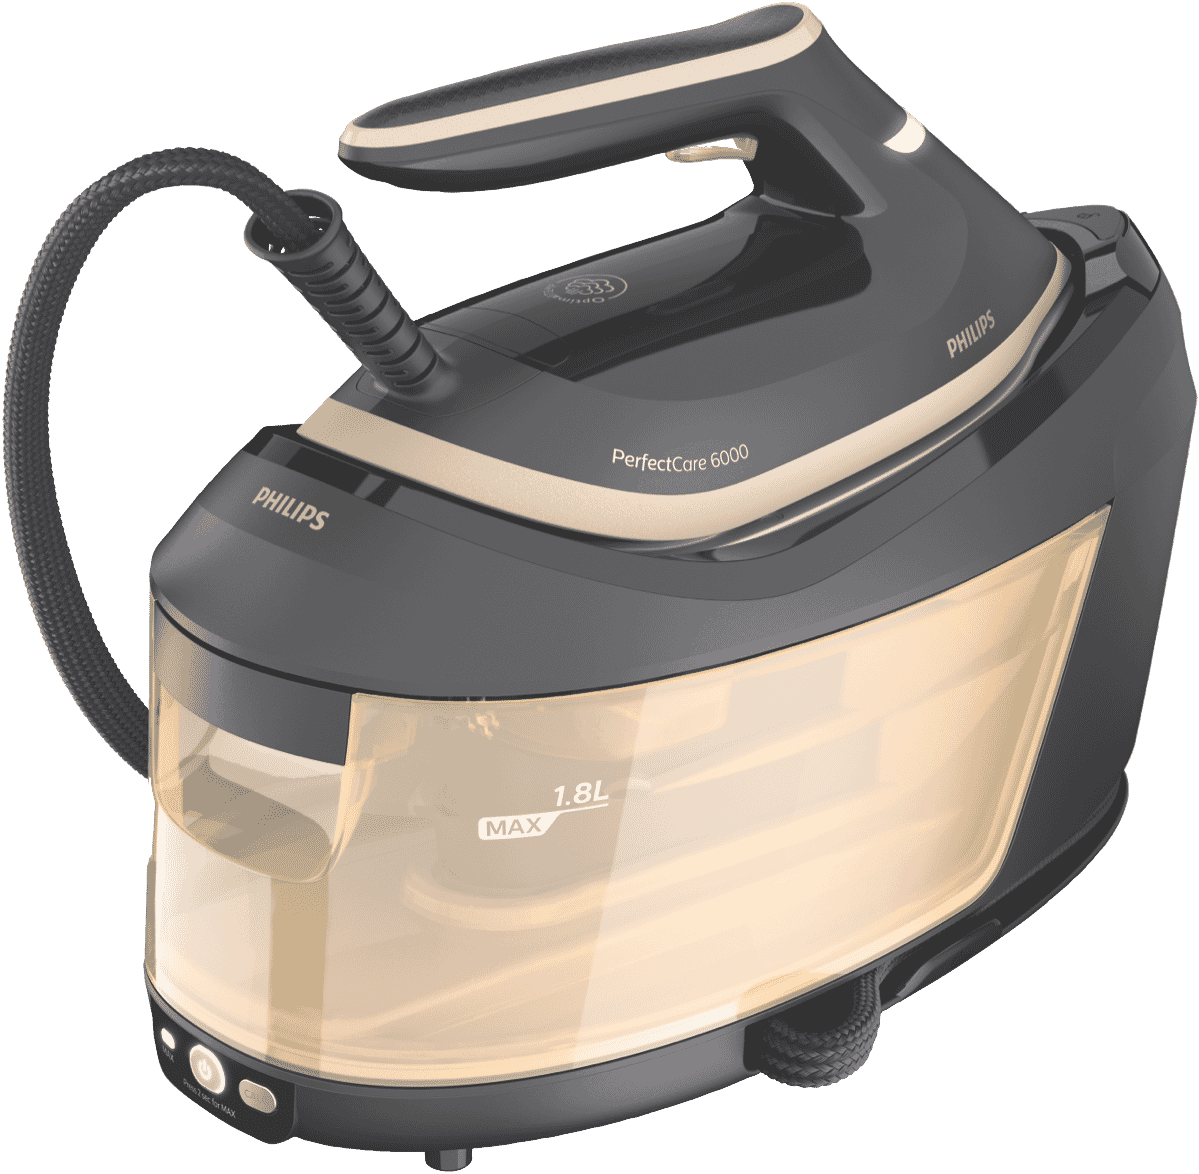 Philips PSG6064/80 PerfectCare 6000 Series Steam Generator Black / Gold at  The Good Guys